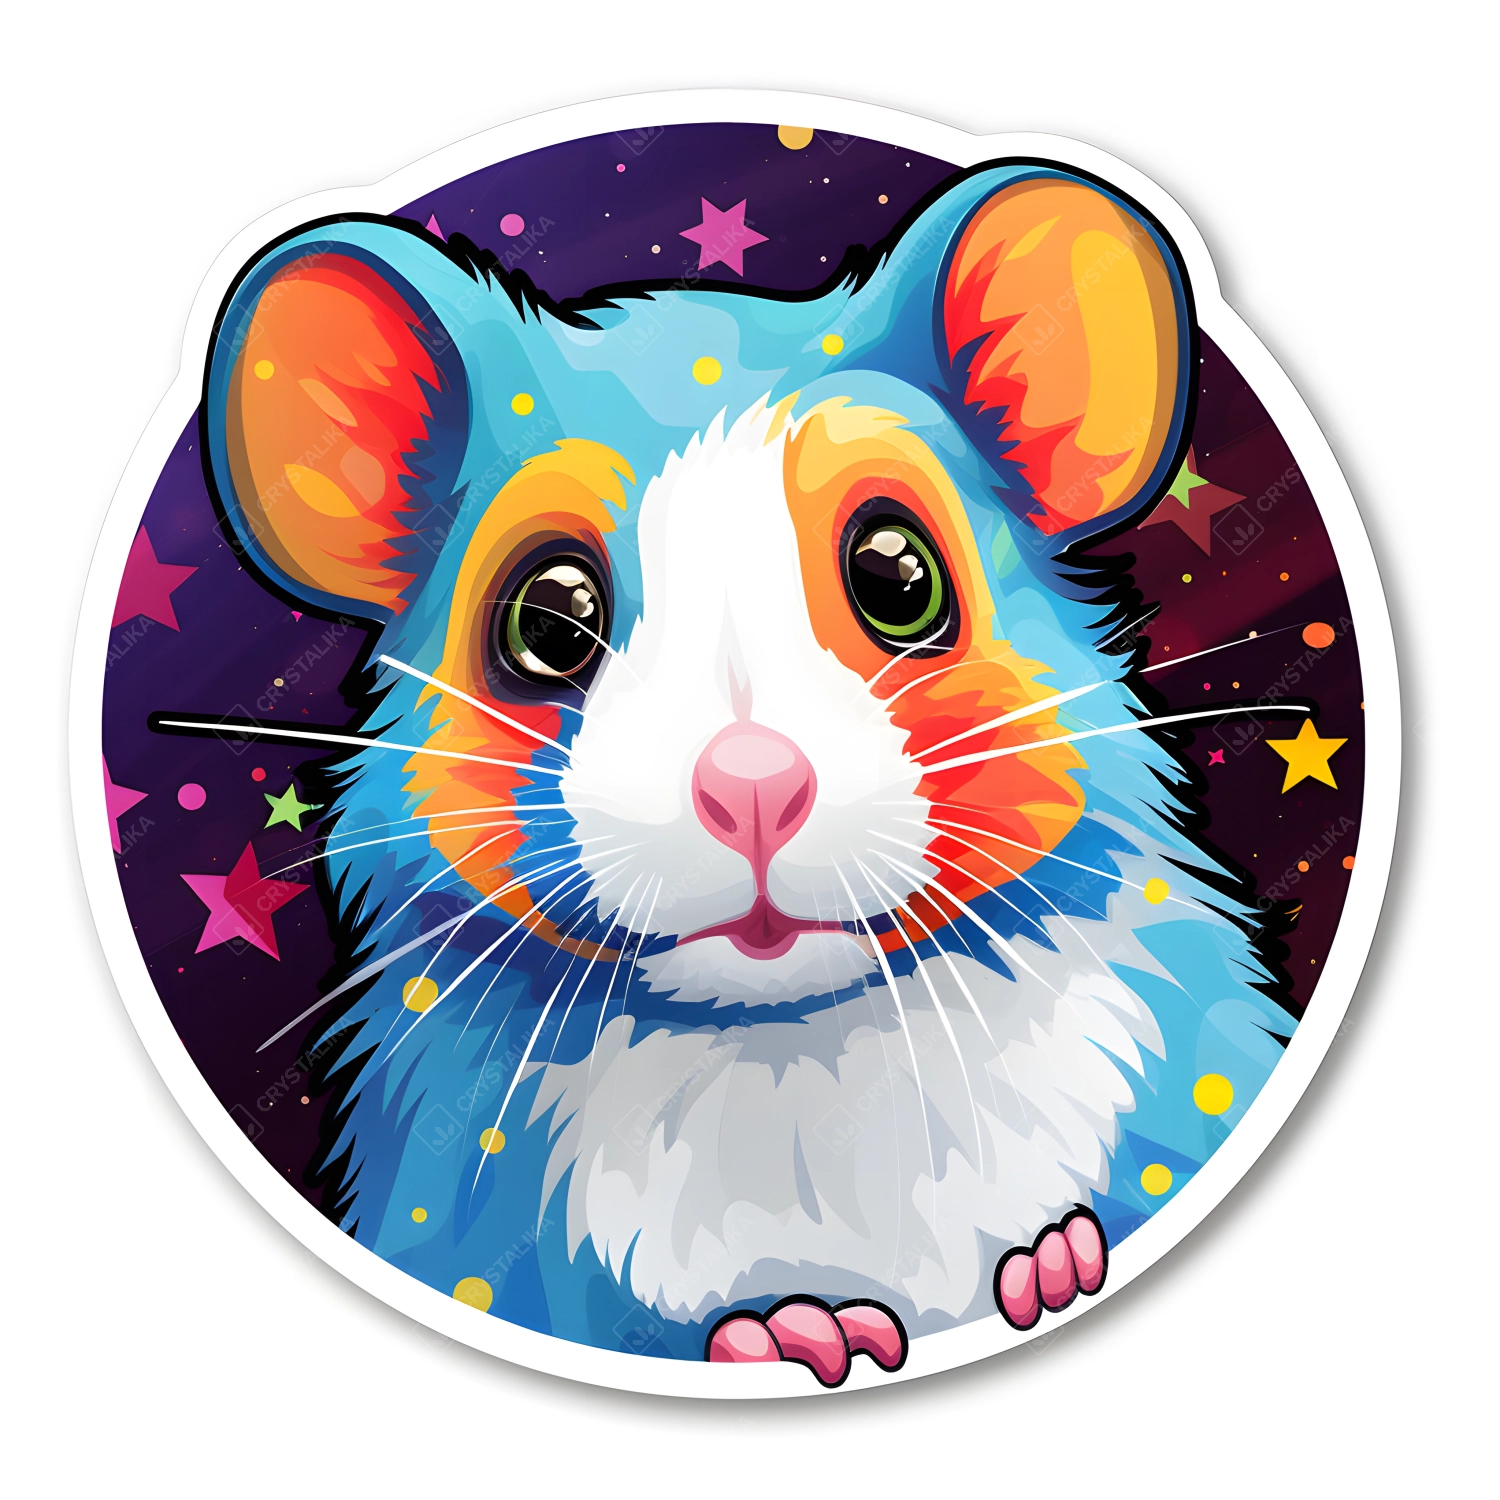 Eccentric Hamster Delight in Round Die-Cut StickerTransform the style with eccentric hamster die-cut sticker, round-shaped, adorned with playful star-shaped accents